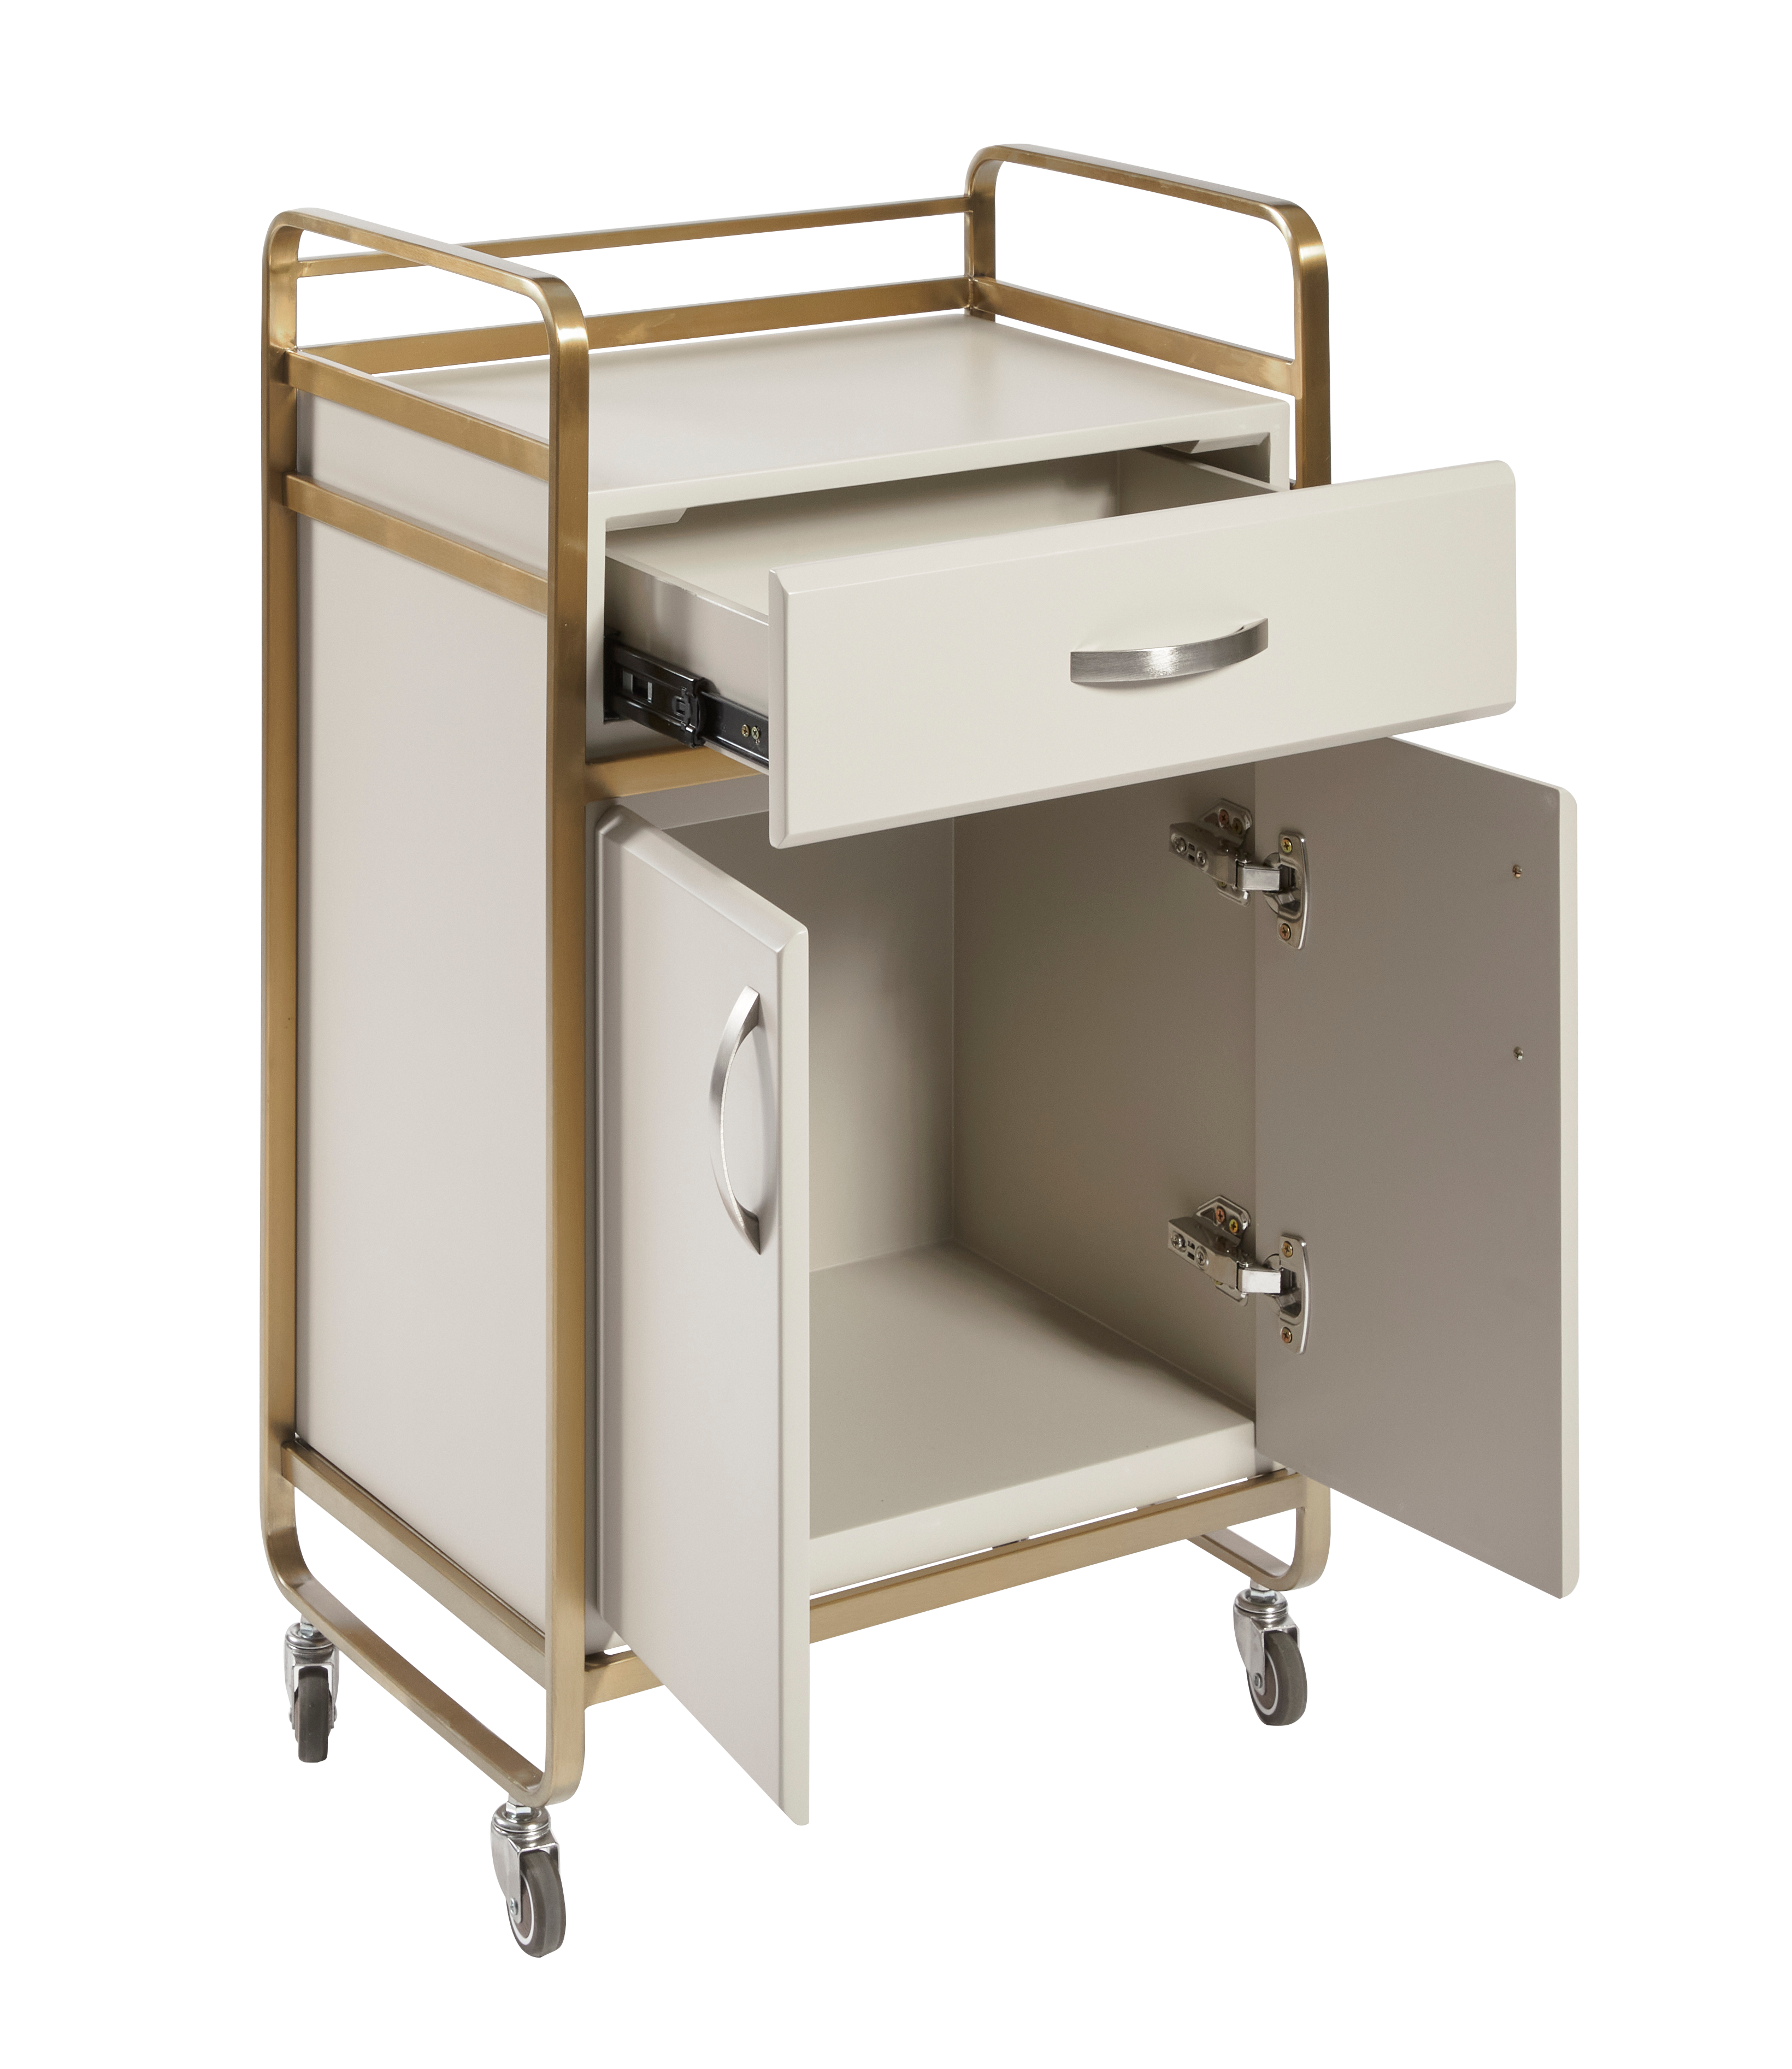 The Nyomi Beauty Trolley - Ivory & Gold by SEC